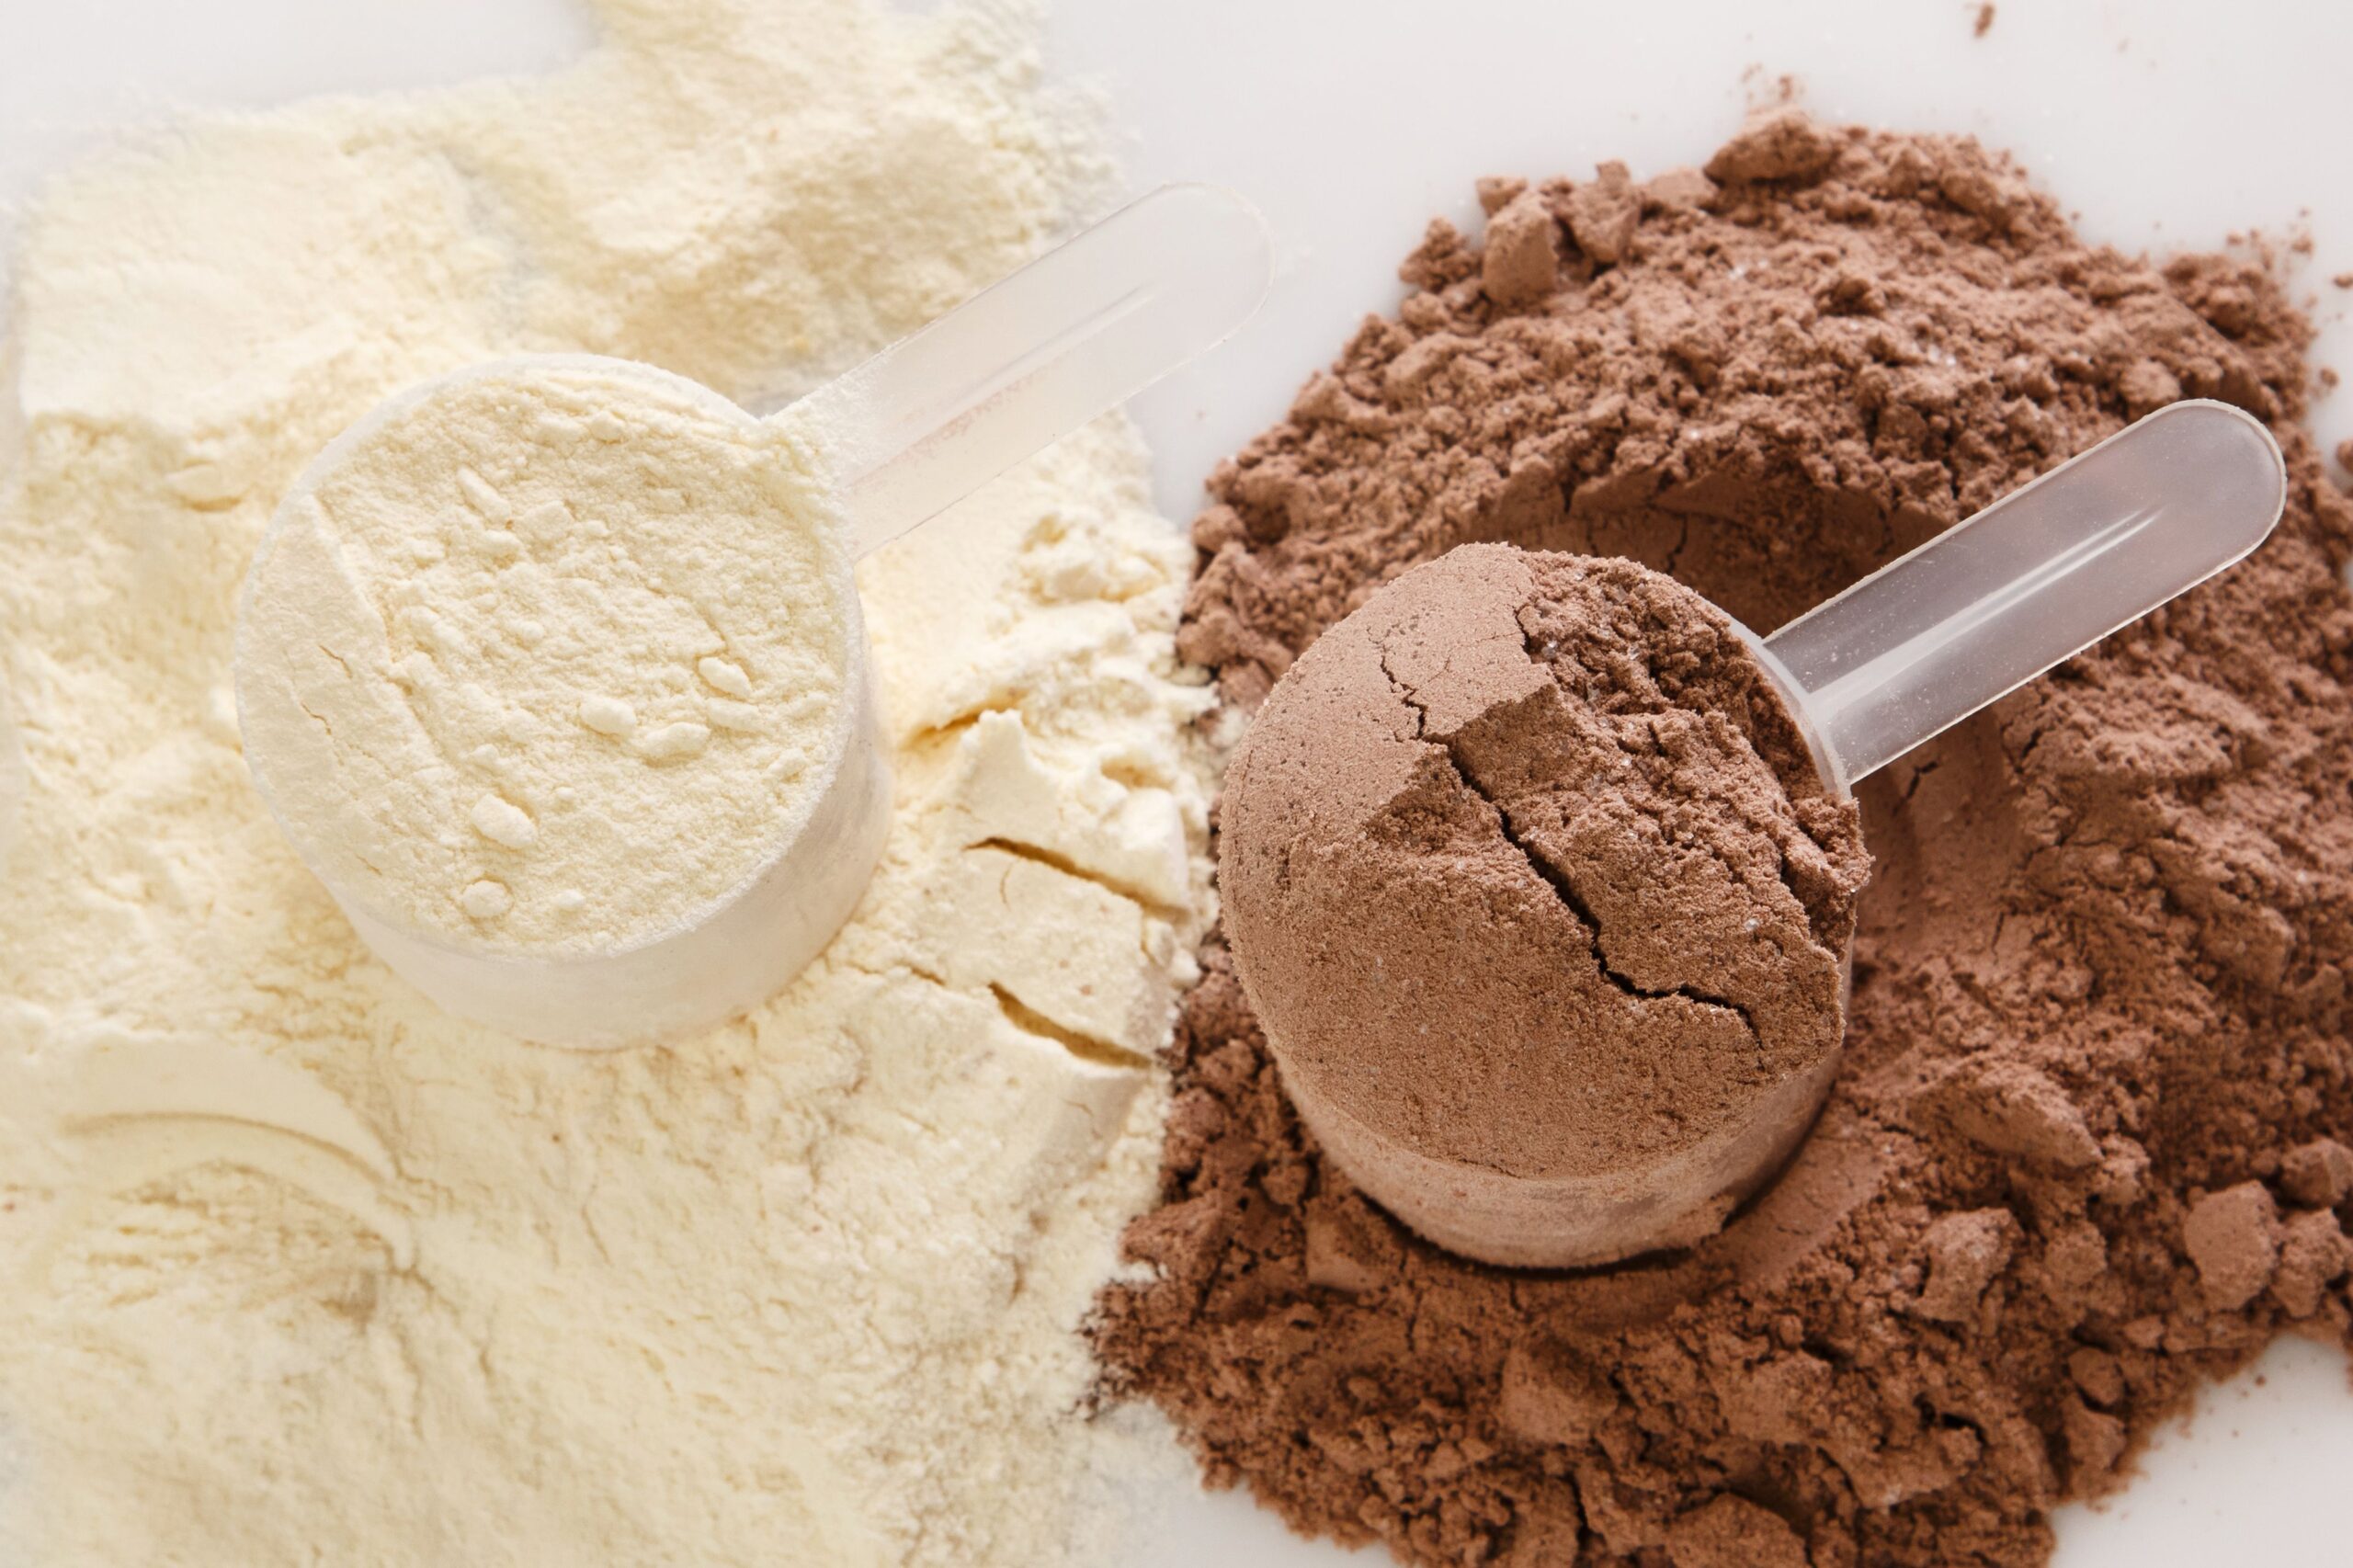 protein powder royalty free image 1015345458 1560268321 scaled